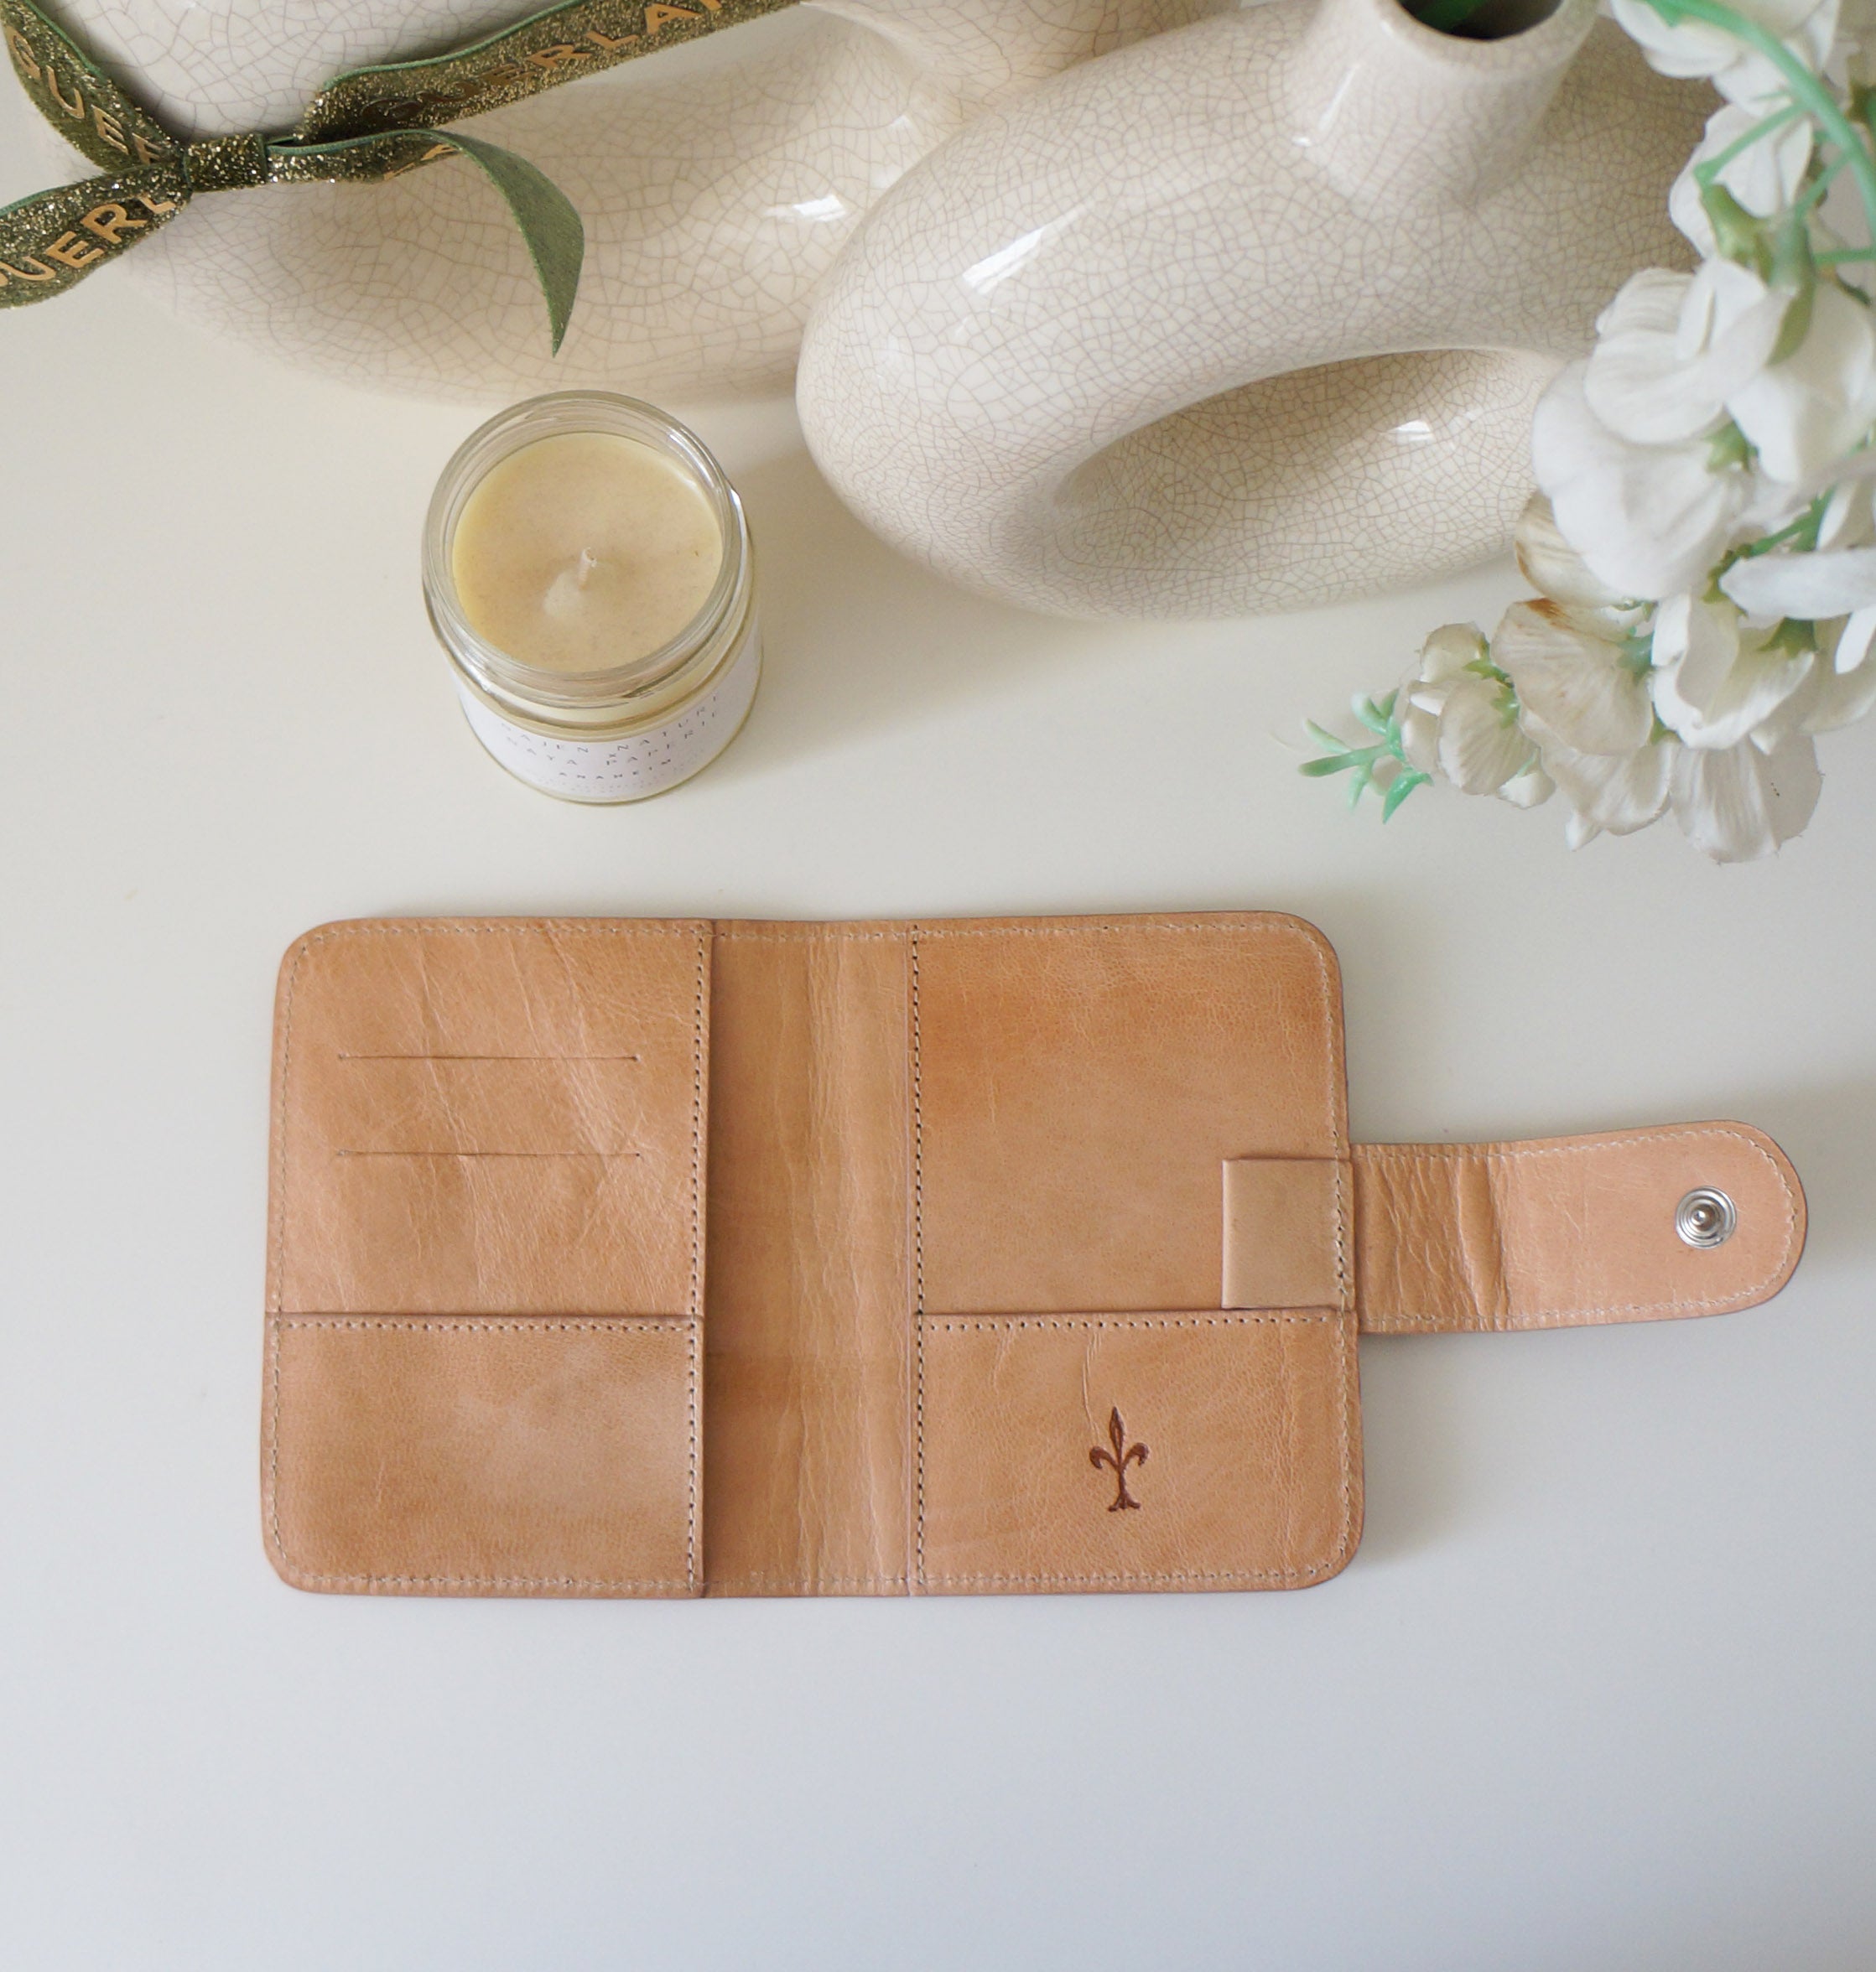 Passport Journal Cover - Stabler Plans Collab Undyed Sheep